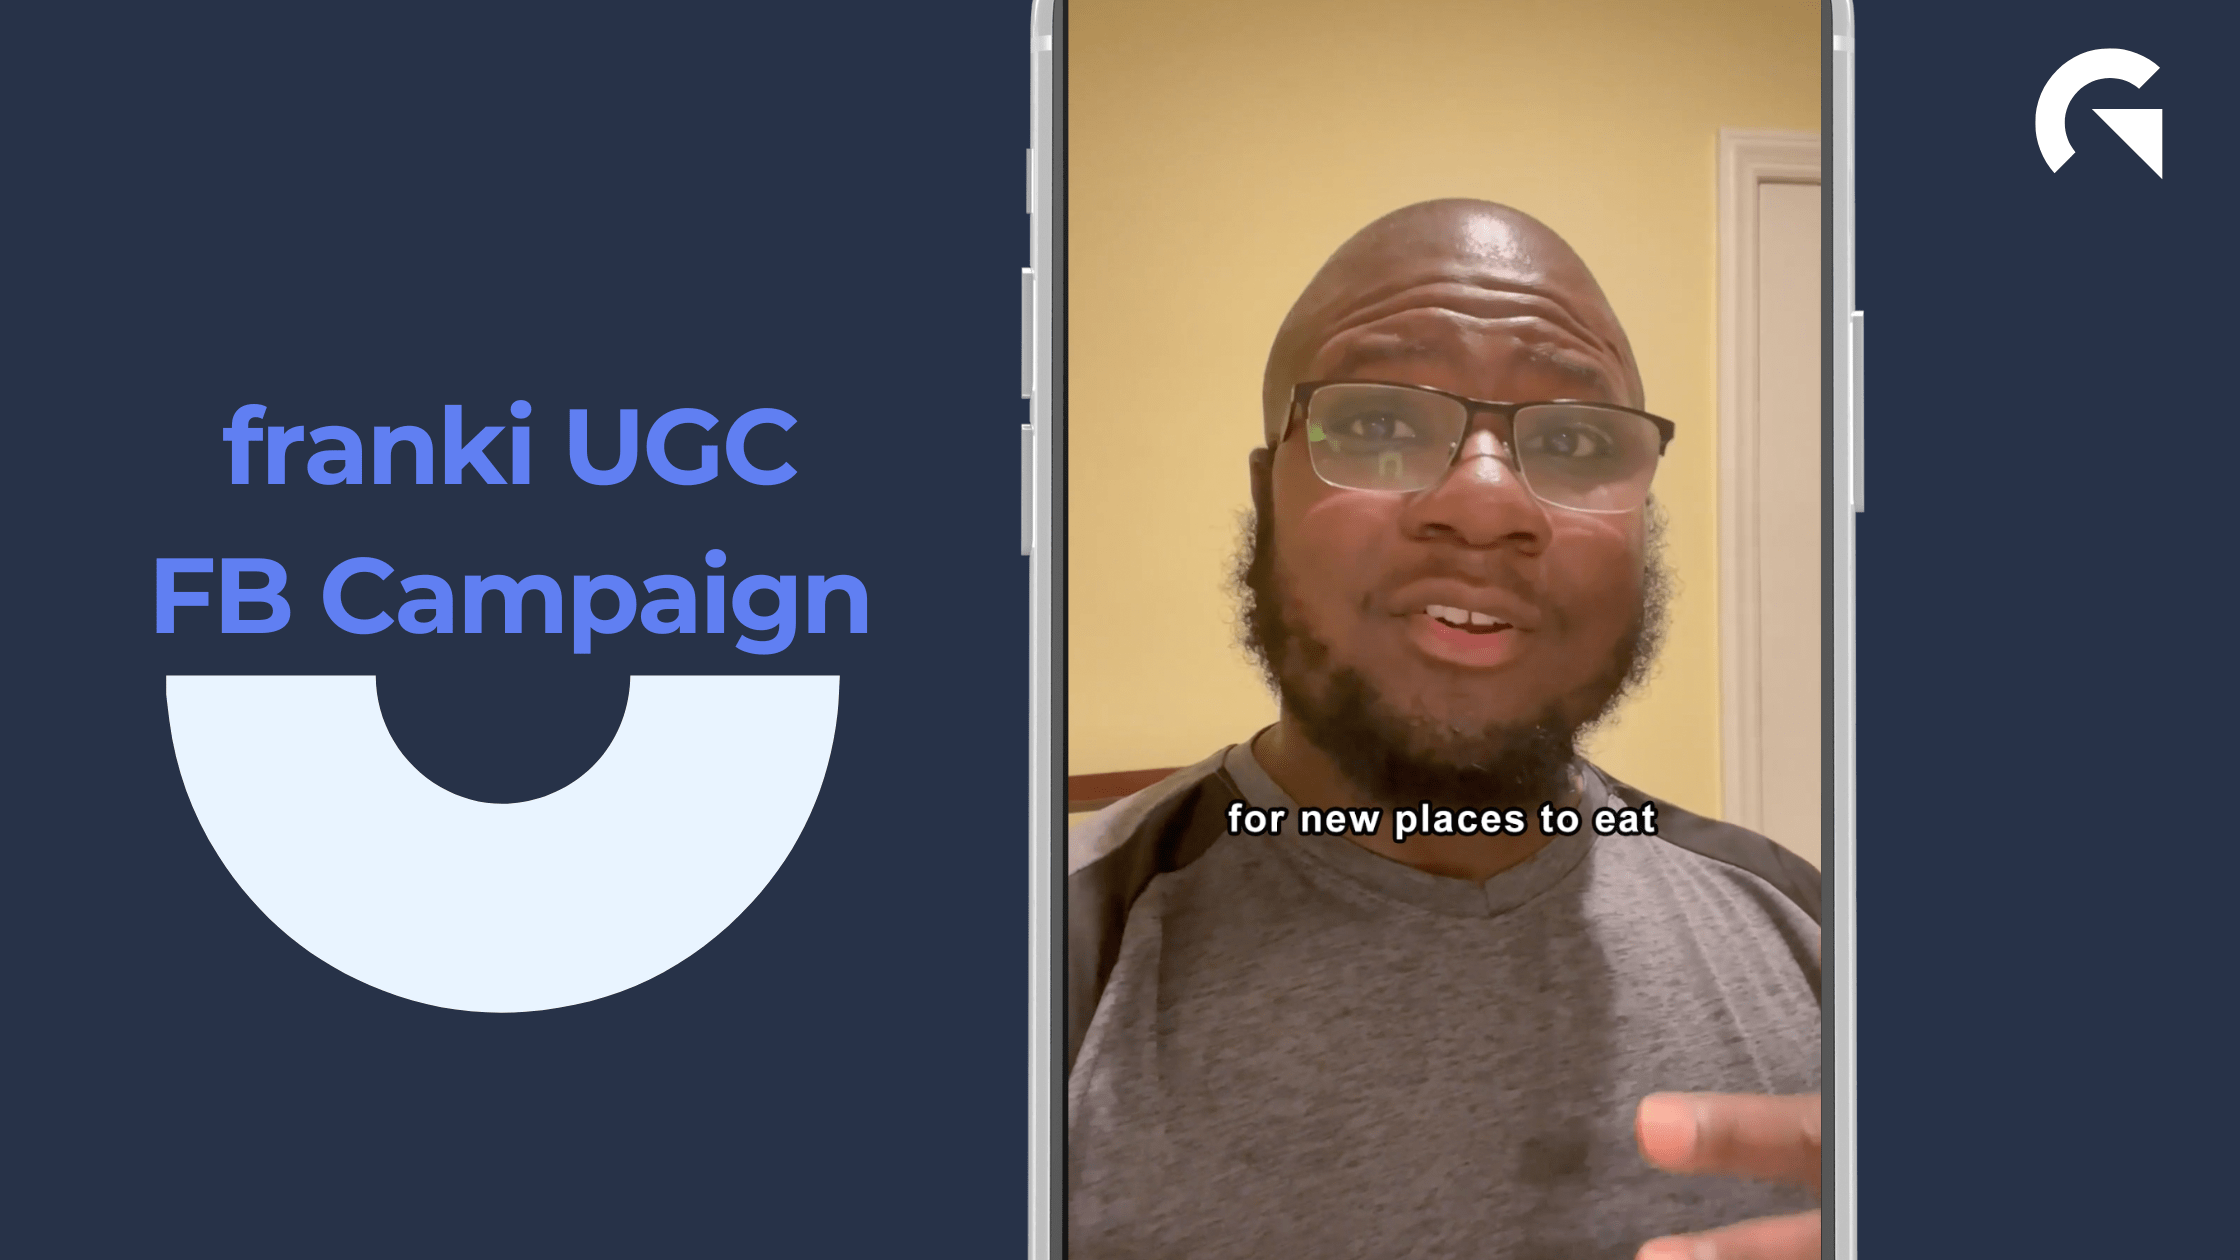 A half-page image with the text "franki UGC FB campaign" with an image of a man facing the camera wearing a grey shirt with glasses, with the caption "for new places to eat"